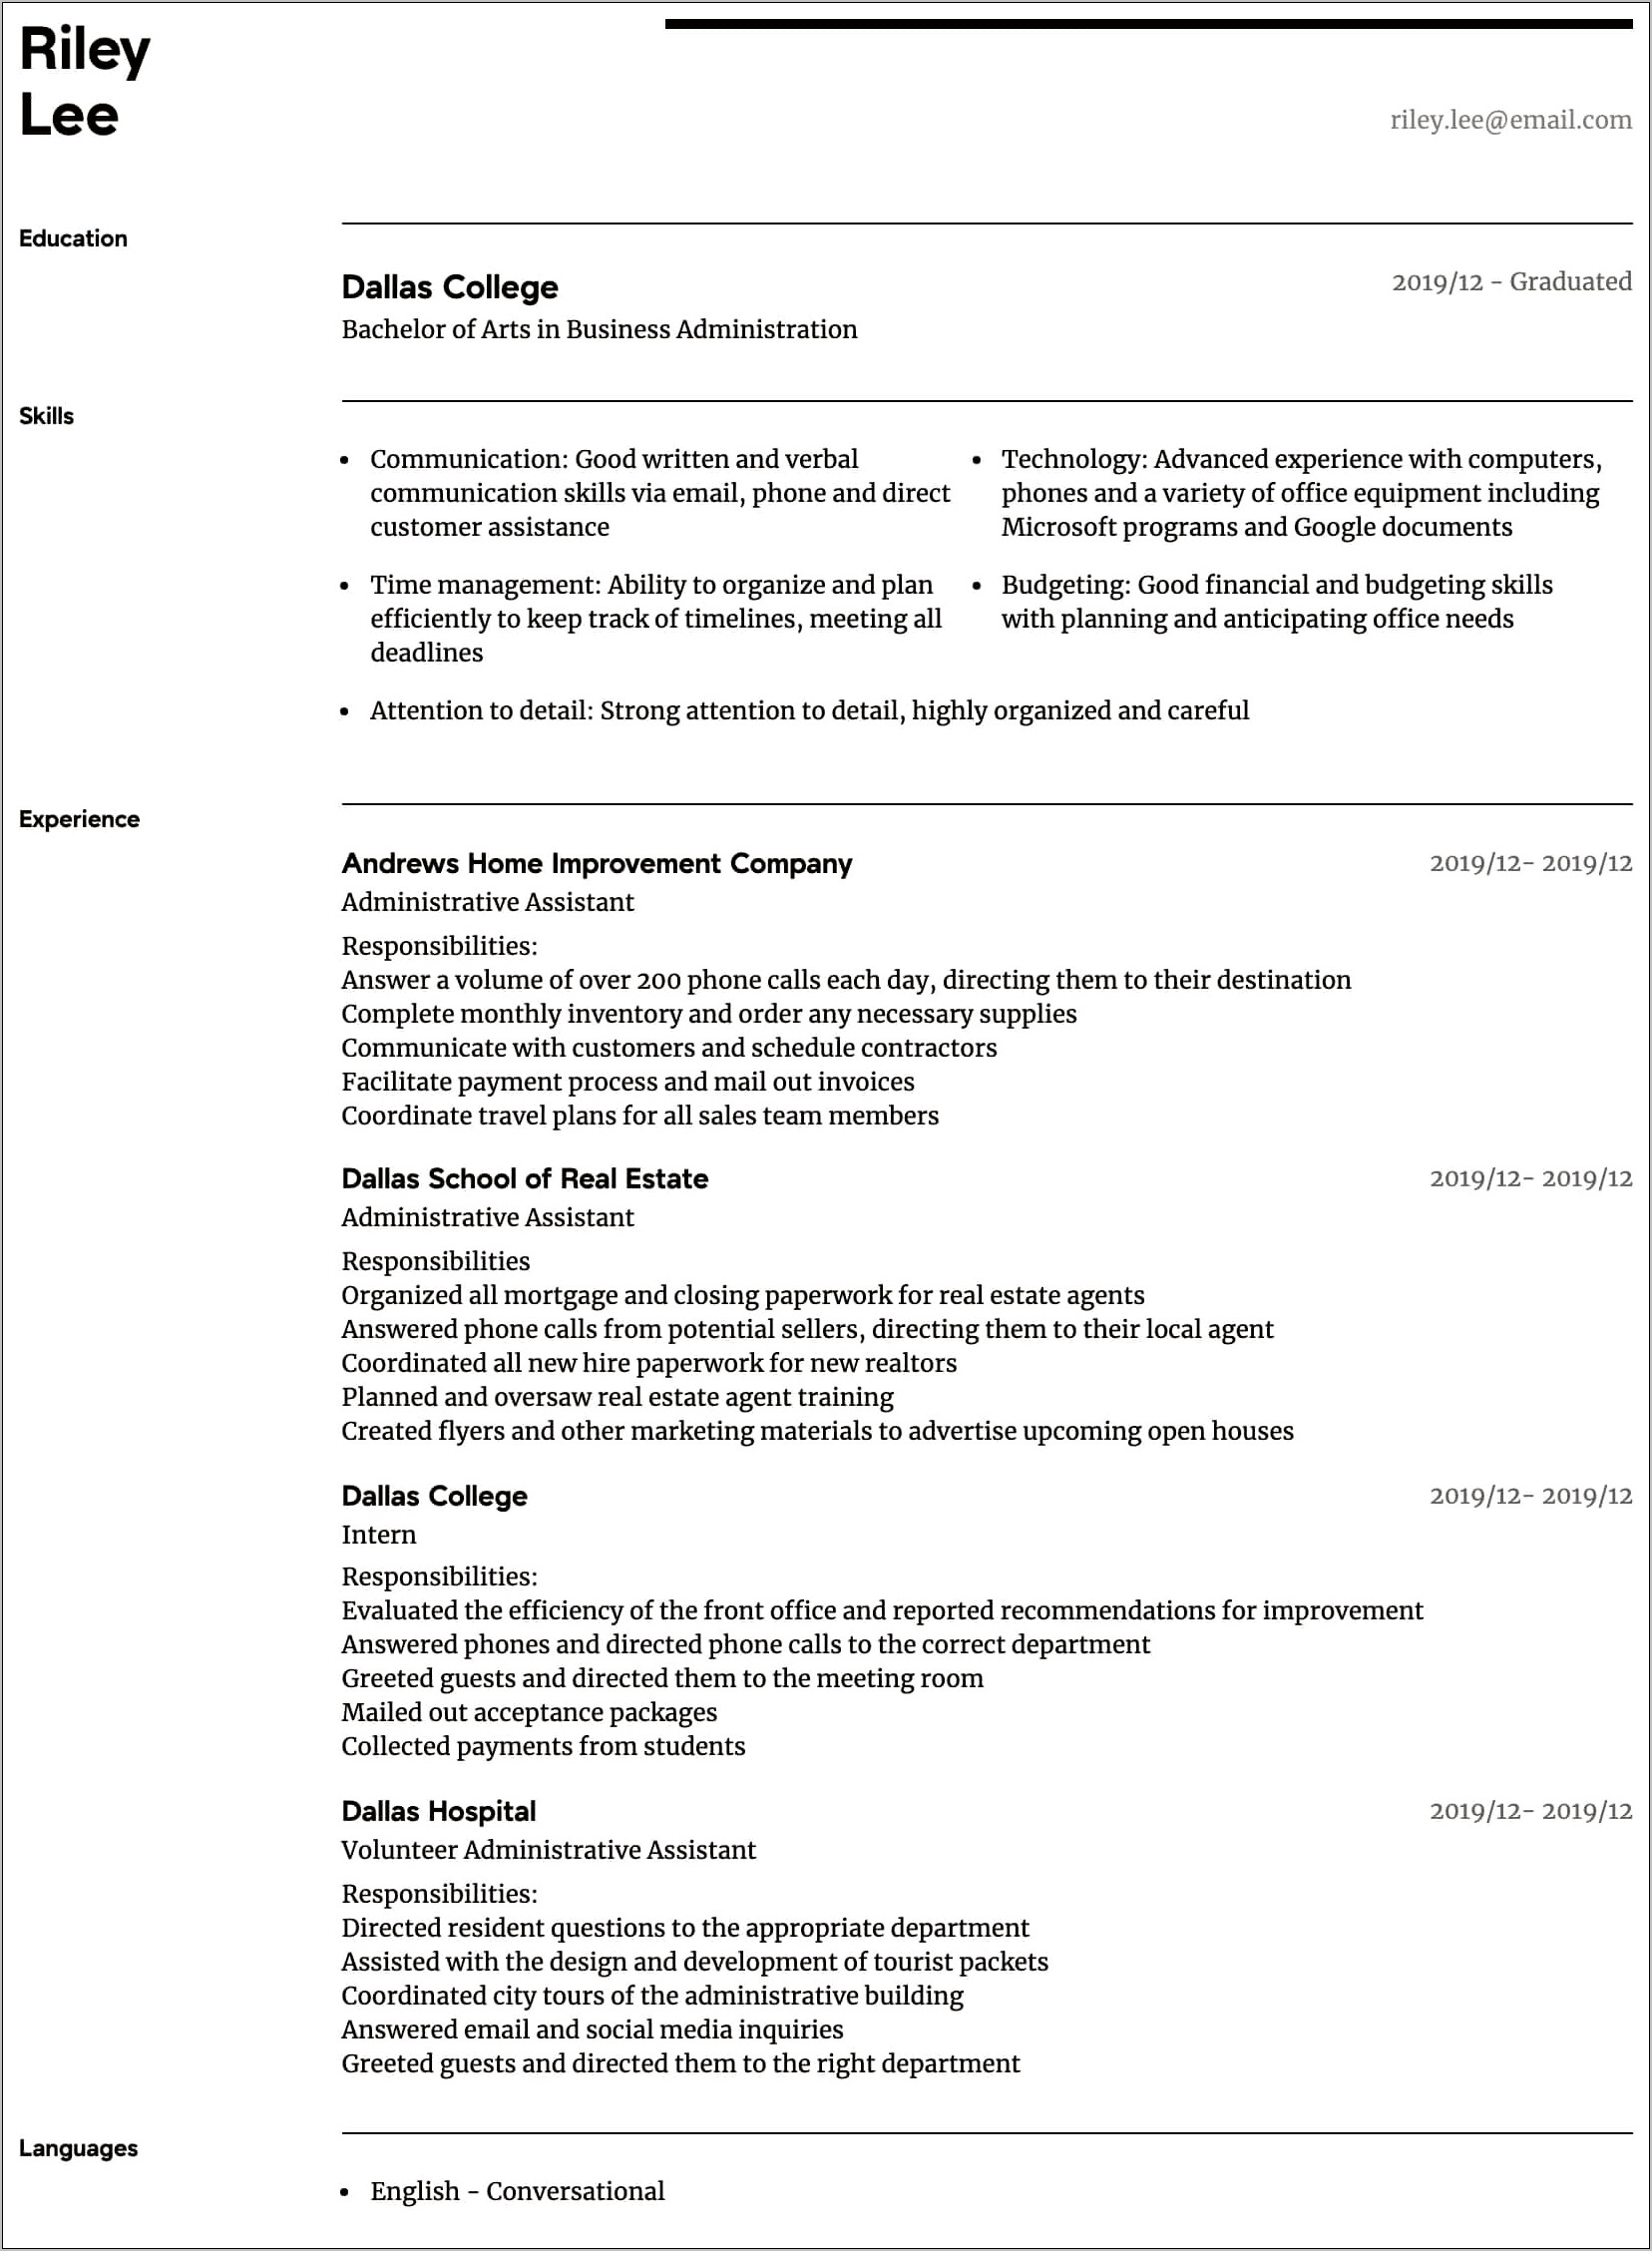 Resume Sample Experienced Administrative Assistant